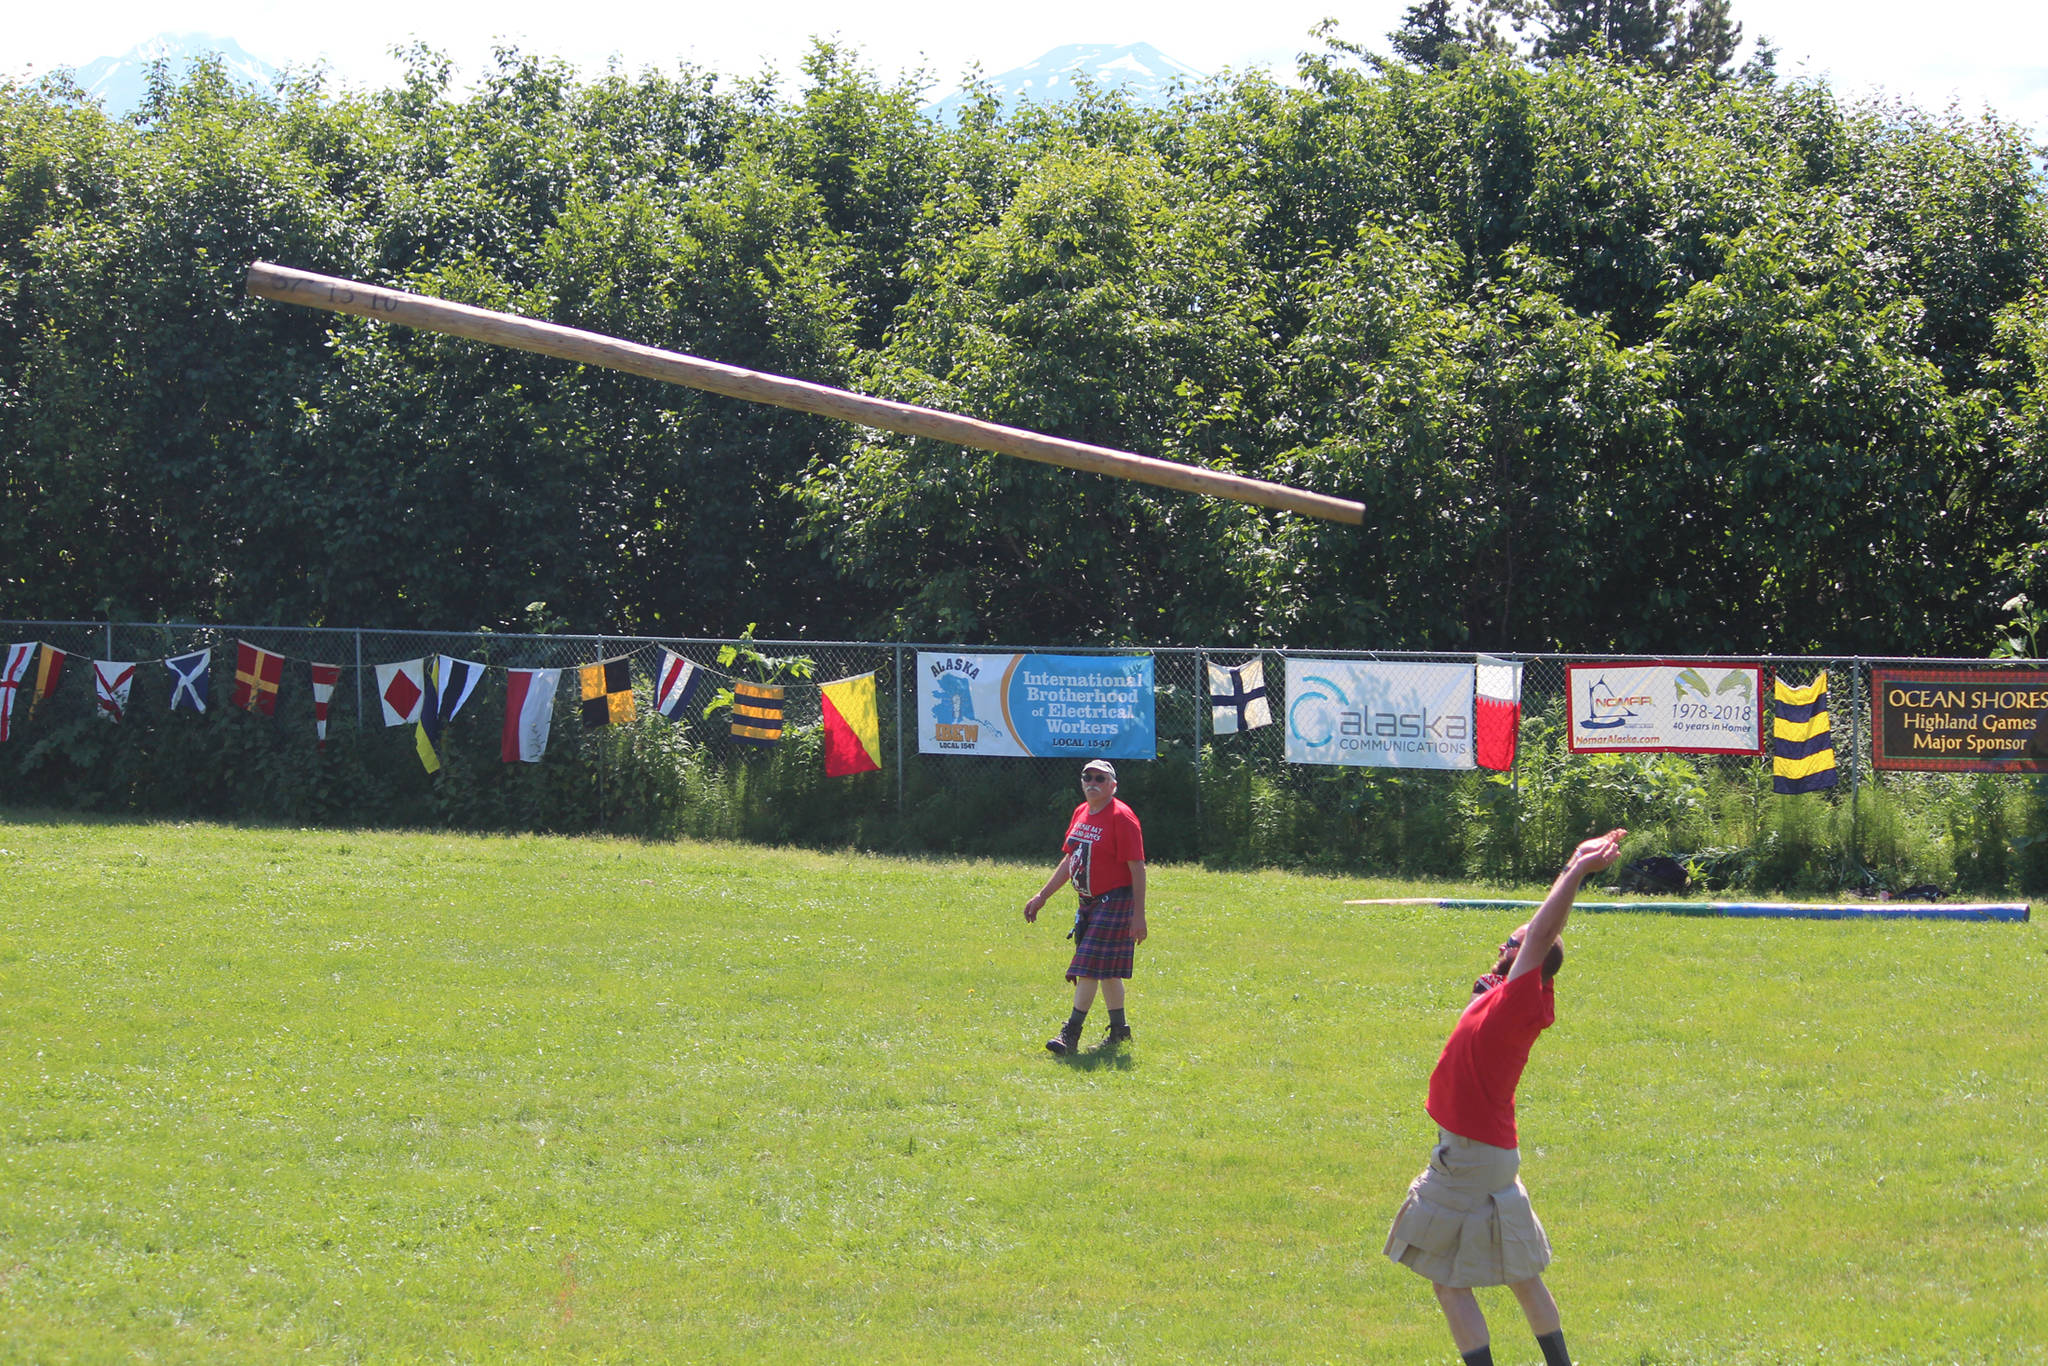 A novice competitor practices throwing a caber while Kachemak Bay Scottish Club President Robert Archibald looks on Saturday, July 7, 2018 at this year’s Kachemak Bay Scottish Highland Games at Karen Hornaday Park in Homer, Alaska. (Photo by Megan Pacer/Homer News)